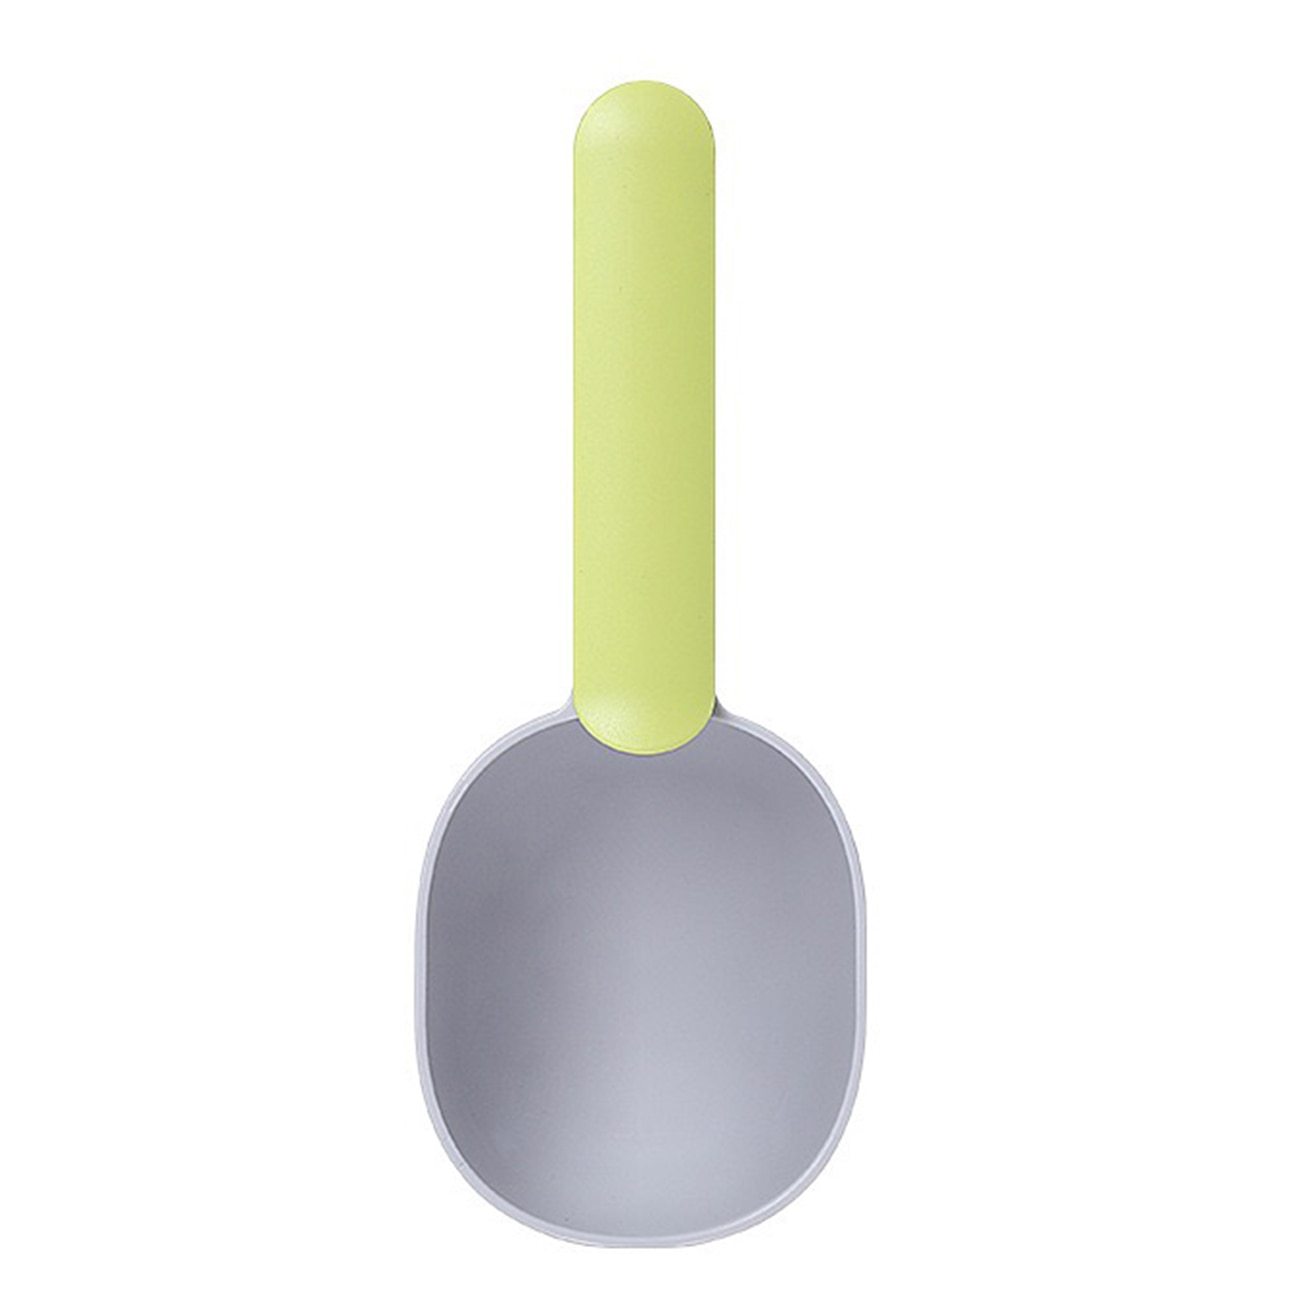 Multifunctional Pet Feeding, Measuring Spoon, Food Portioning Cup, Curved Design - Green Gray